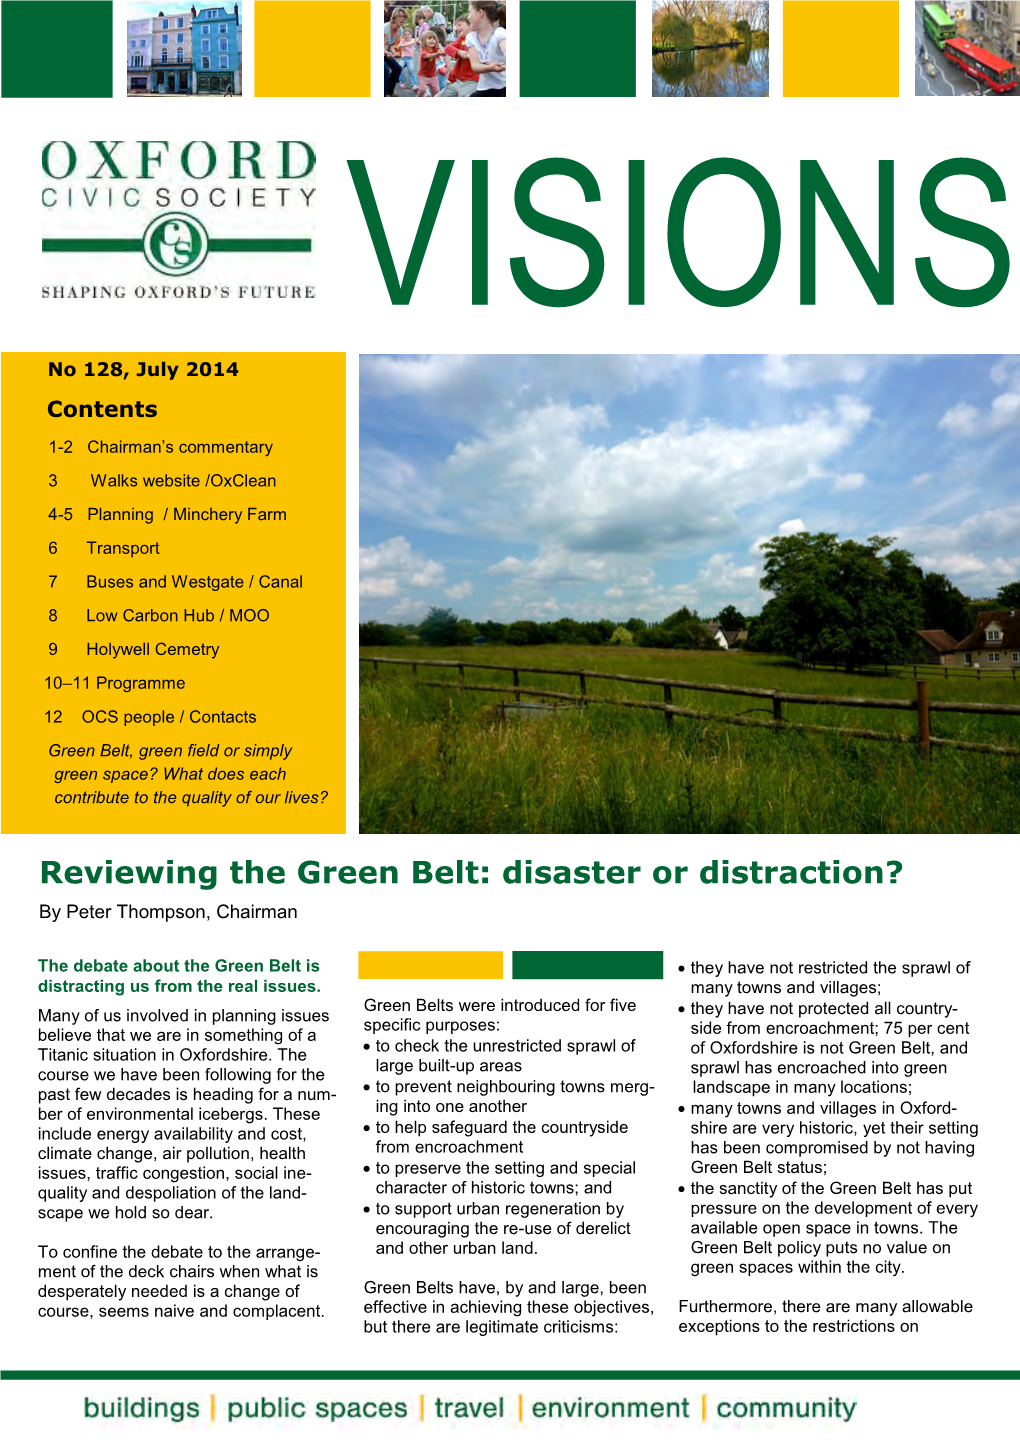 Reviewing the Green Belt: Disaster Or Distraction? by Peter Thompson, Chairman